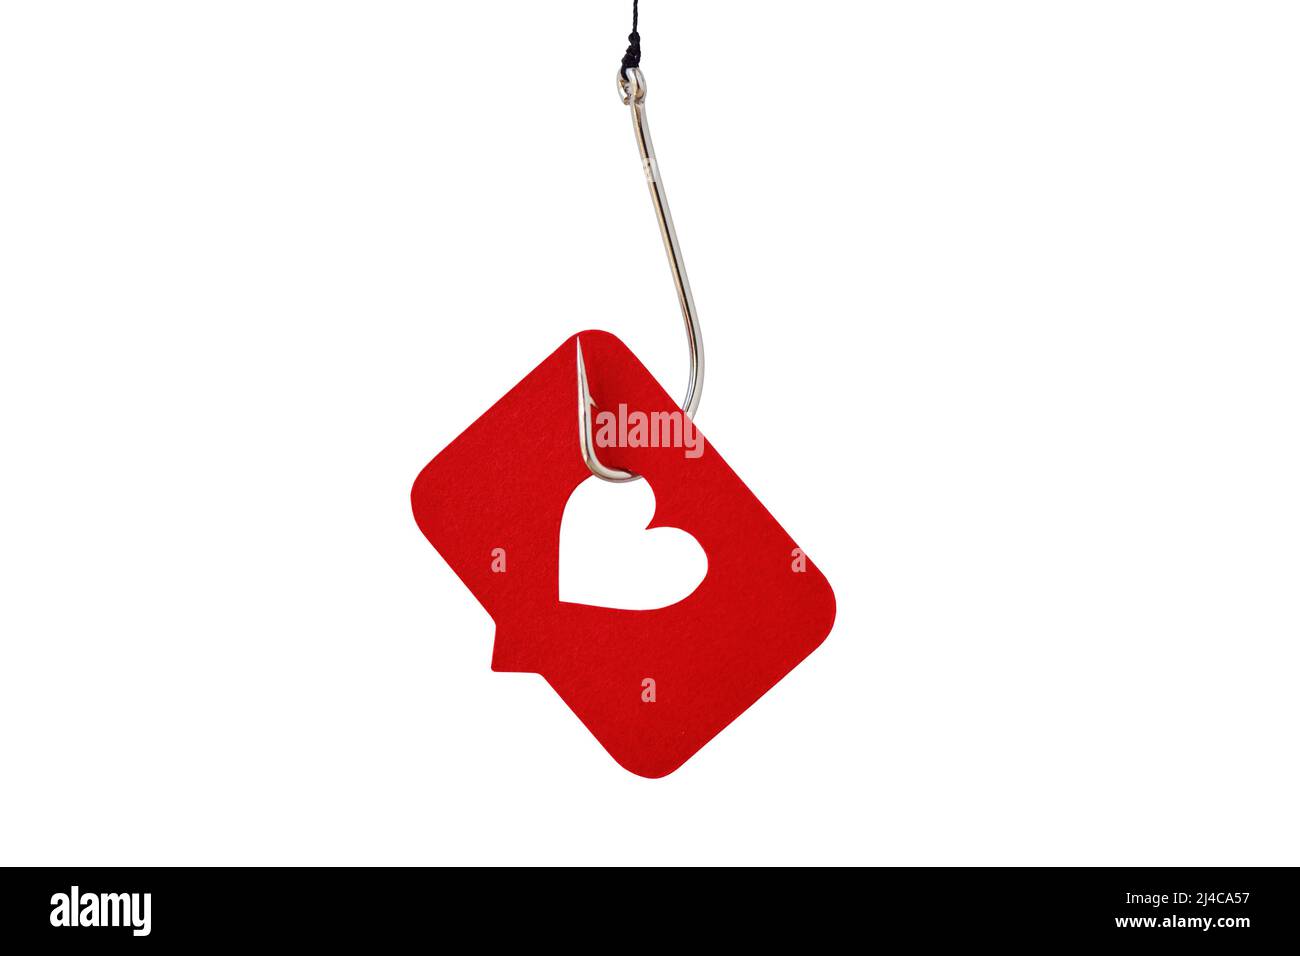 Fishing hook with social media like button on white background - Concept of social media, popularity and marketing strategy Stock Photo